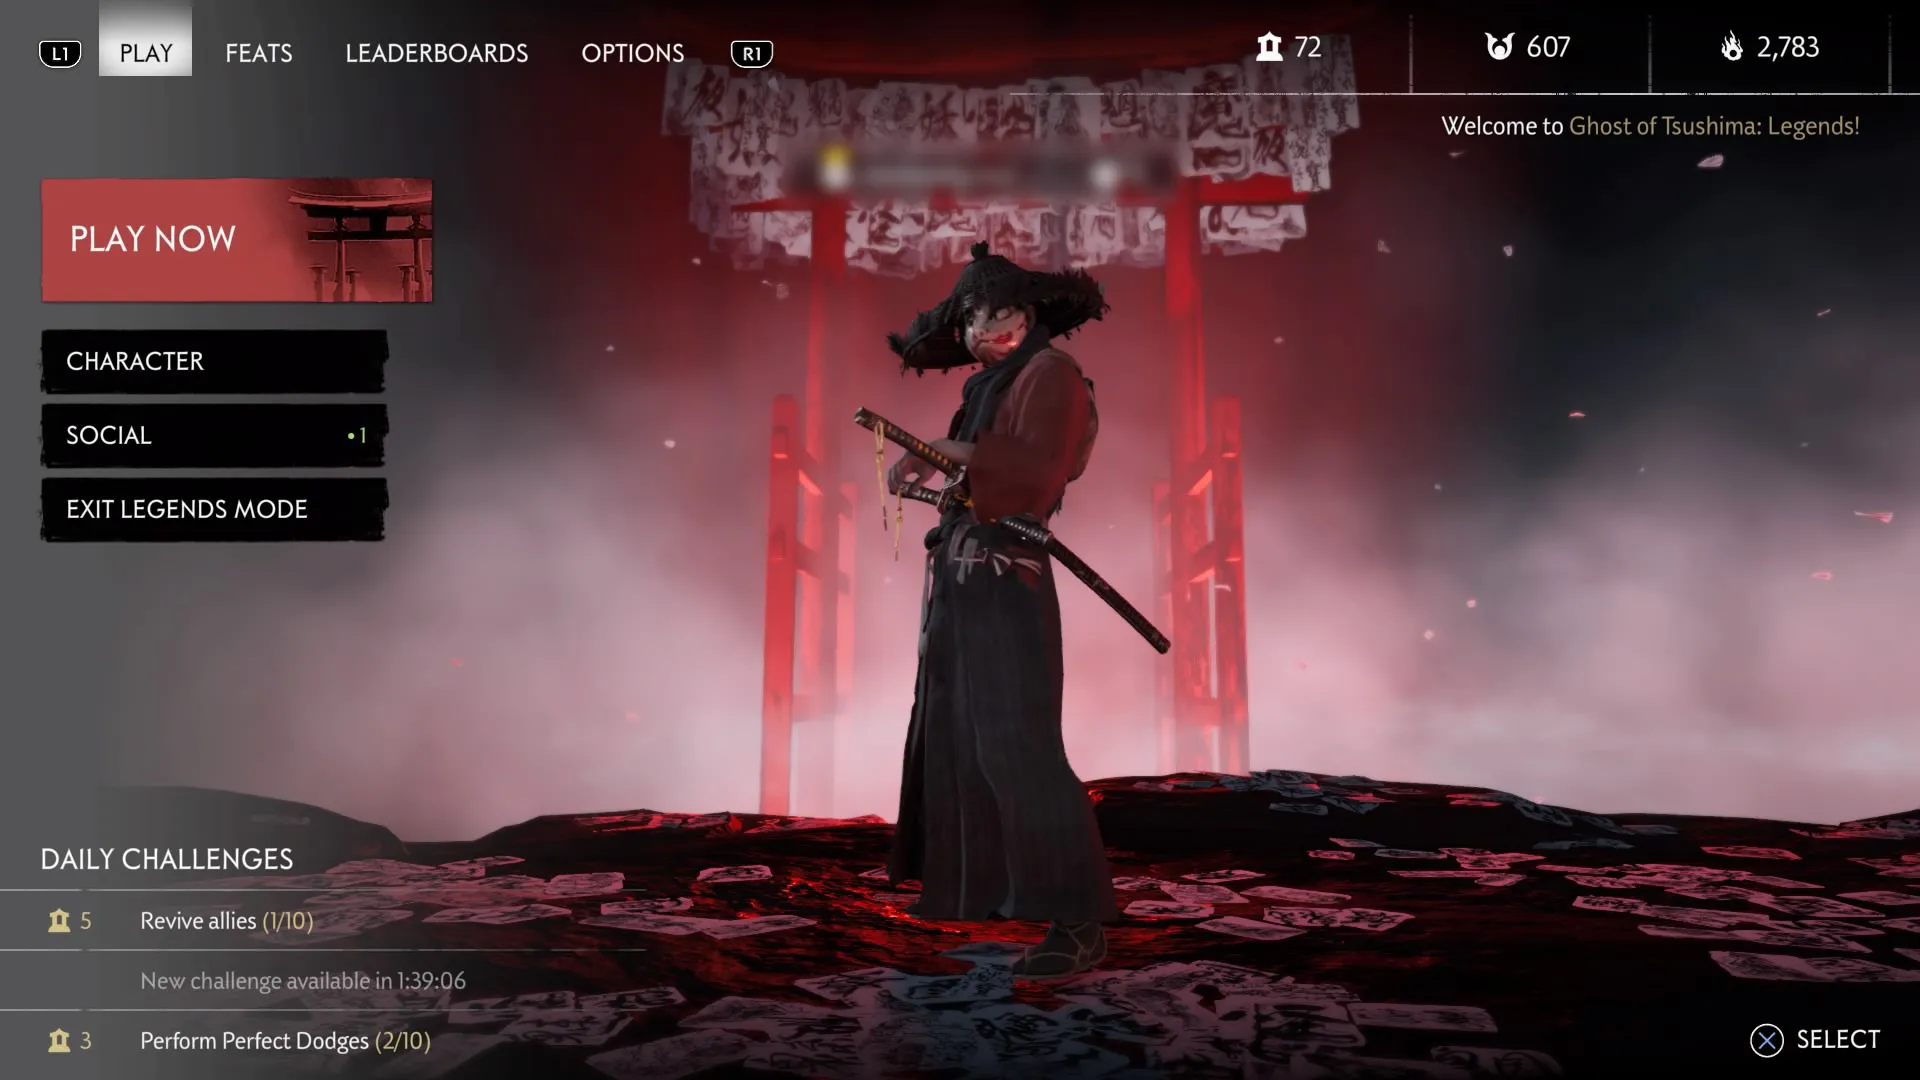 Ghost of Tsushima Legends: Beginners Guide to Classes - KeenGamer